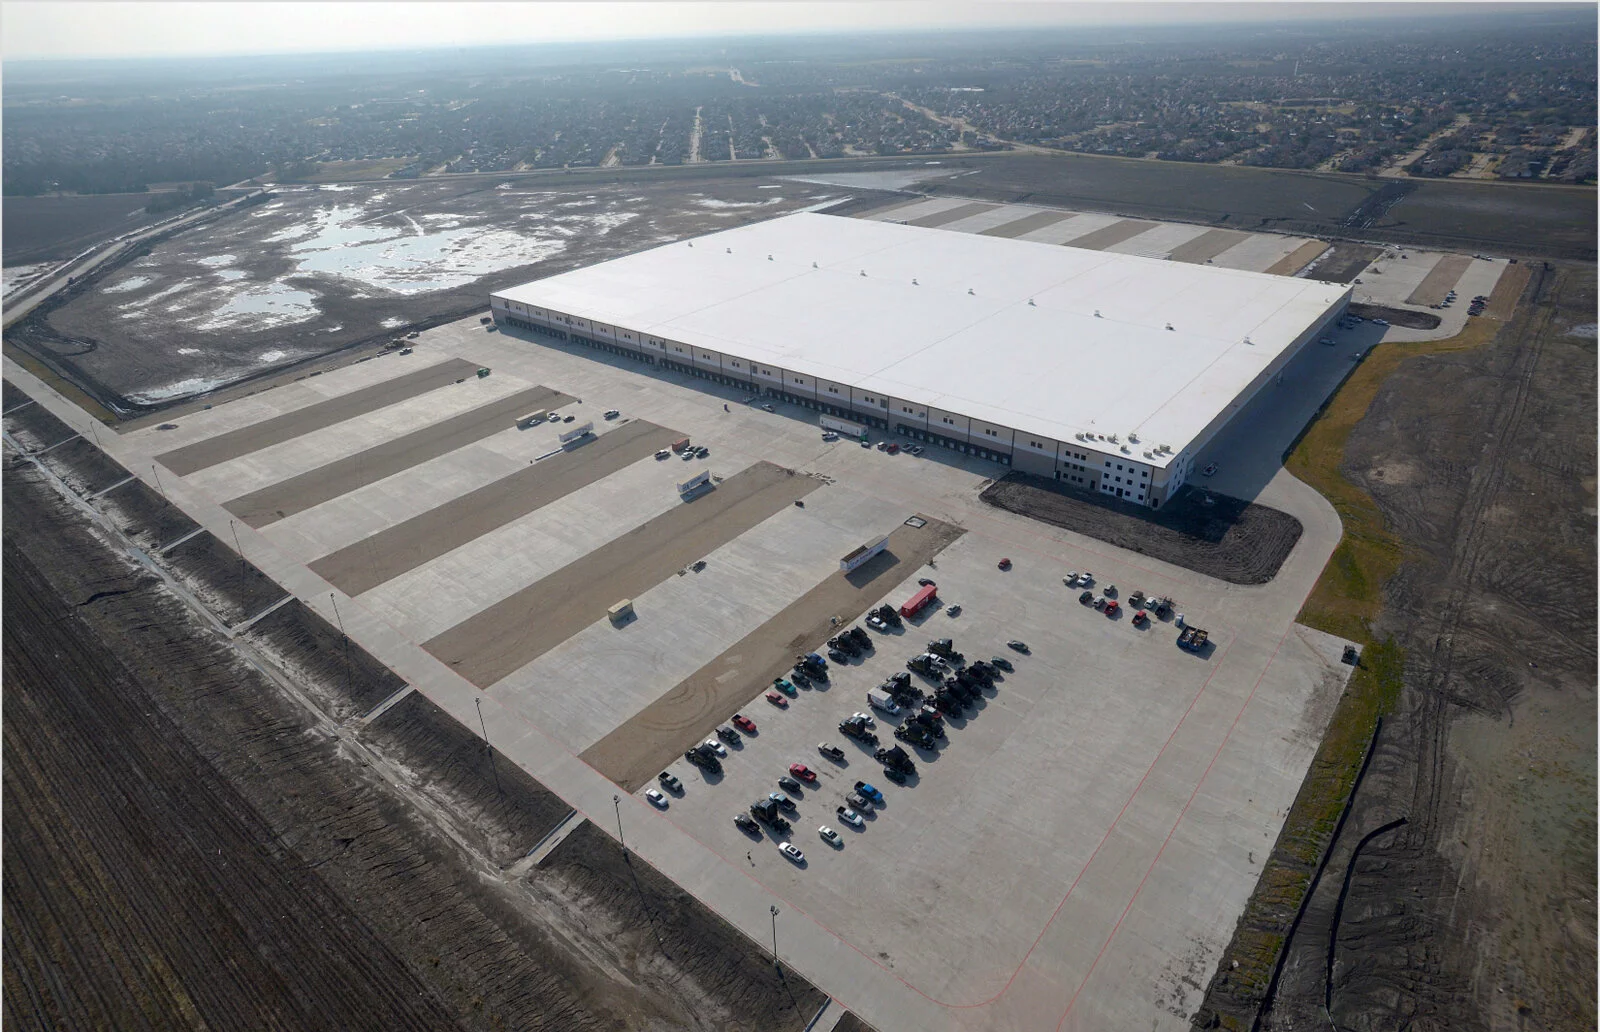 Aerial Exterior of Ashley Furniture warehouse, sprawling landscape in the background, parking around facility, photo taken on a sunny day with minor fog.